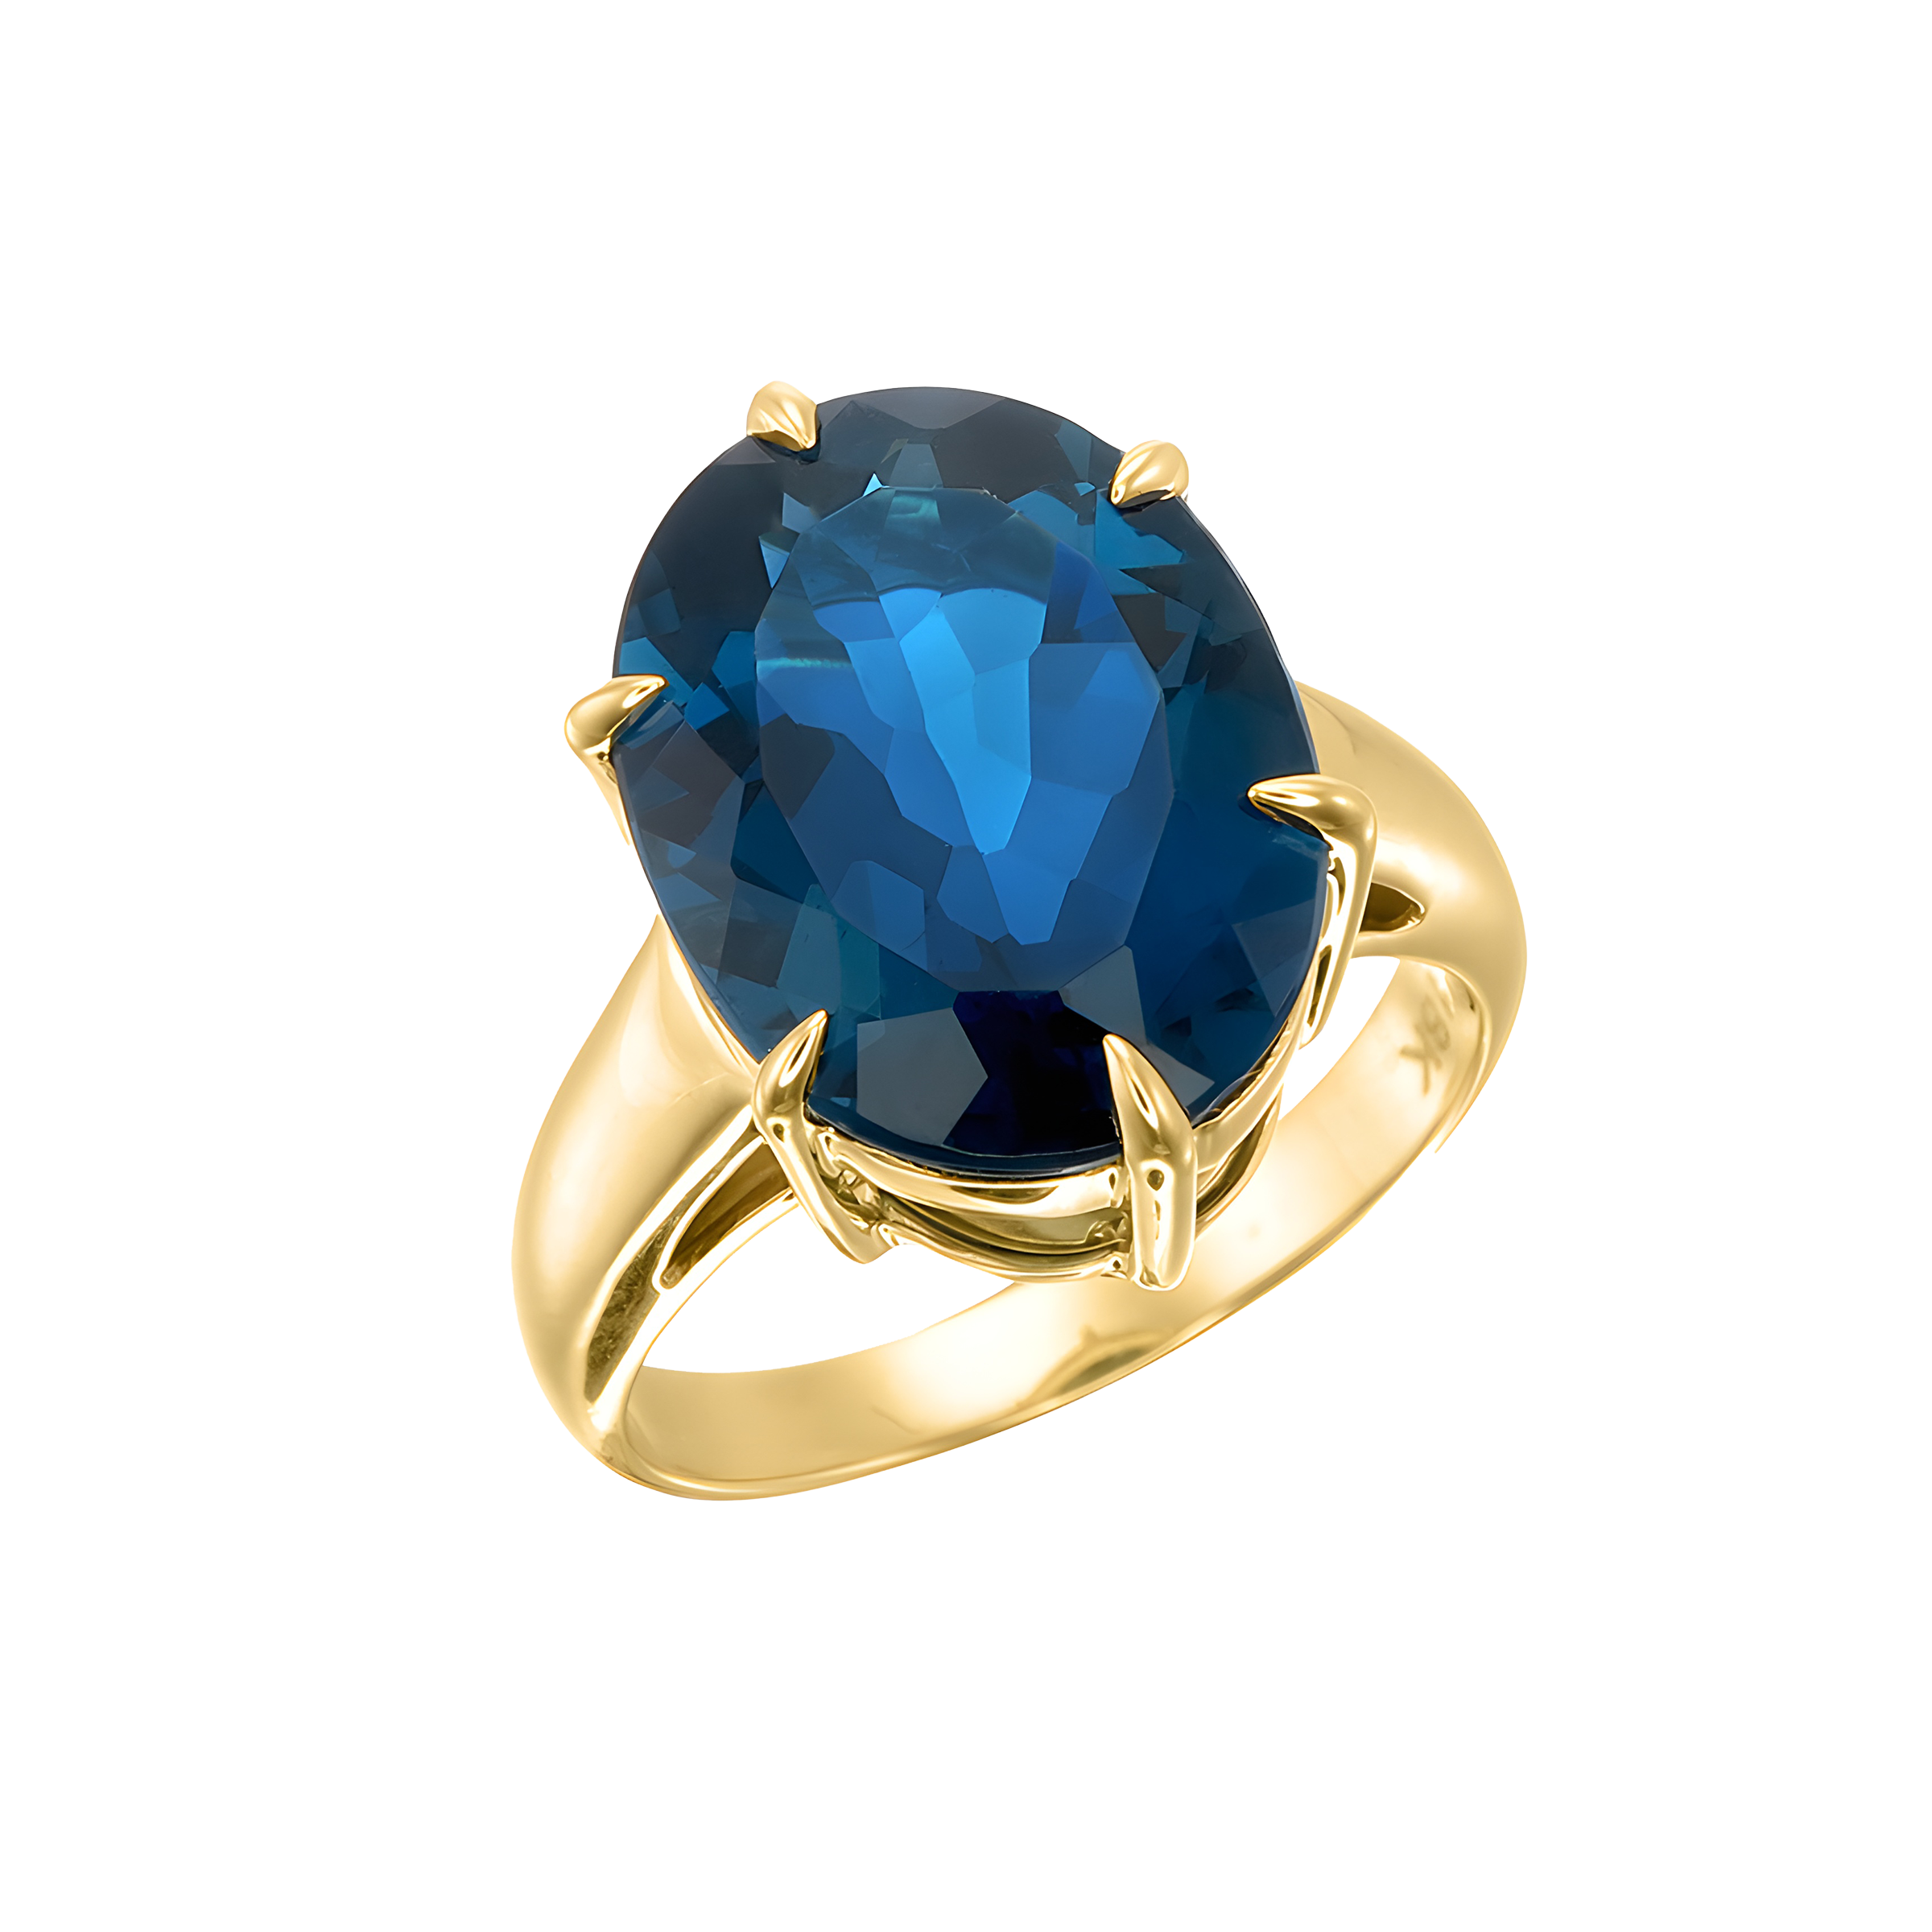 Oval Blue Topaz Cocktail Ring in 18k Yellow gold